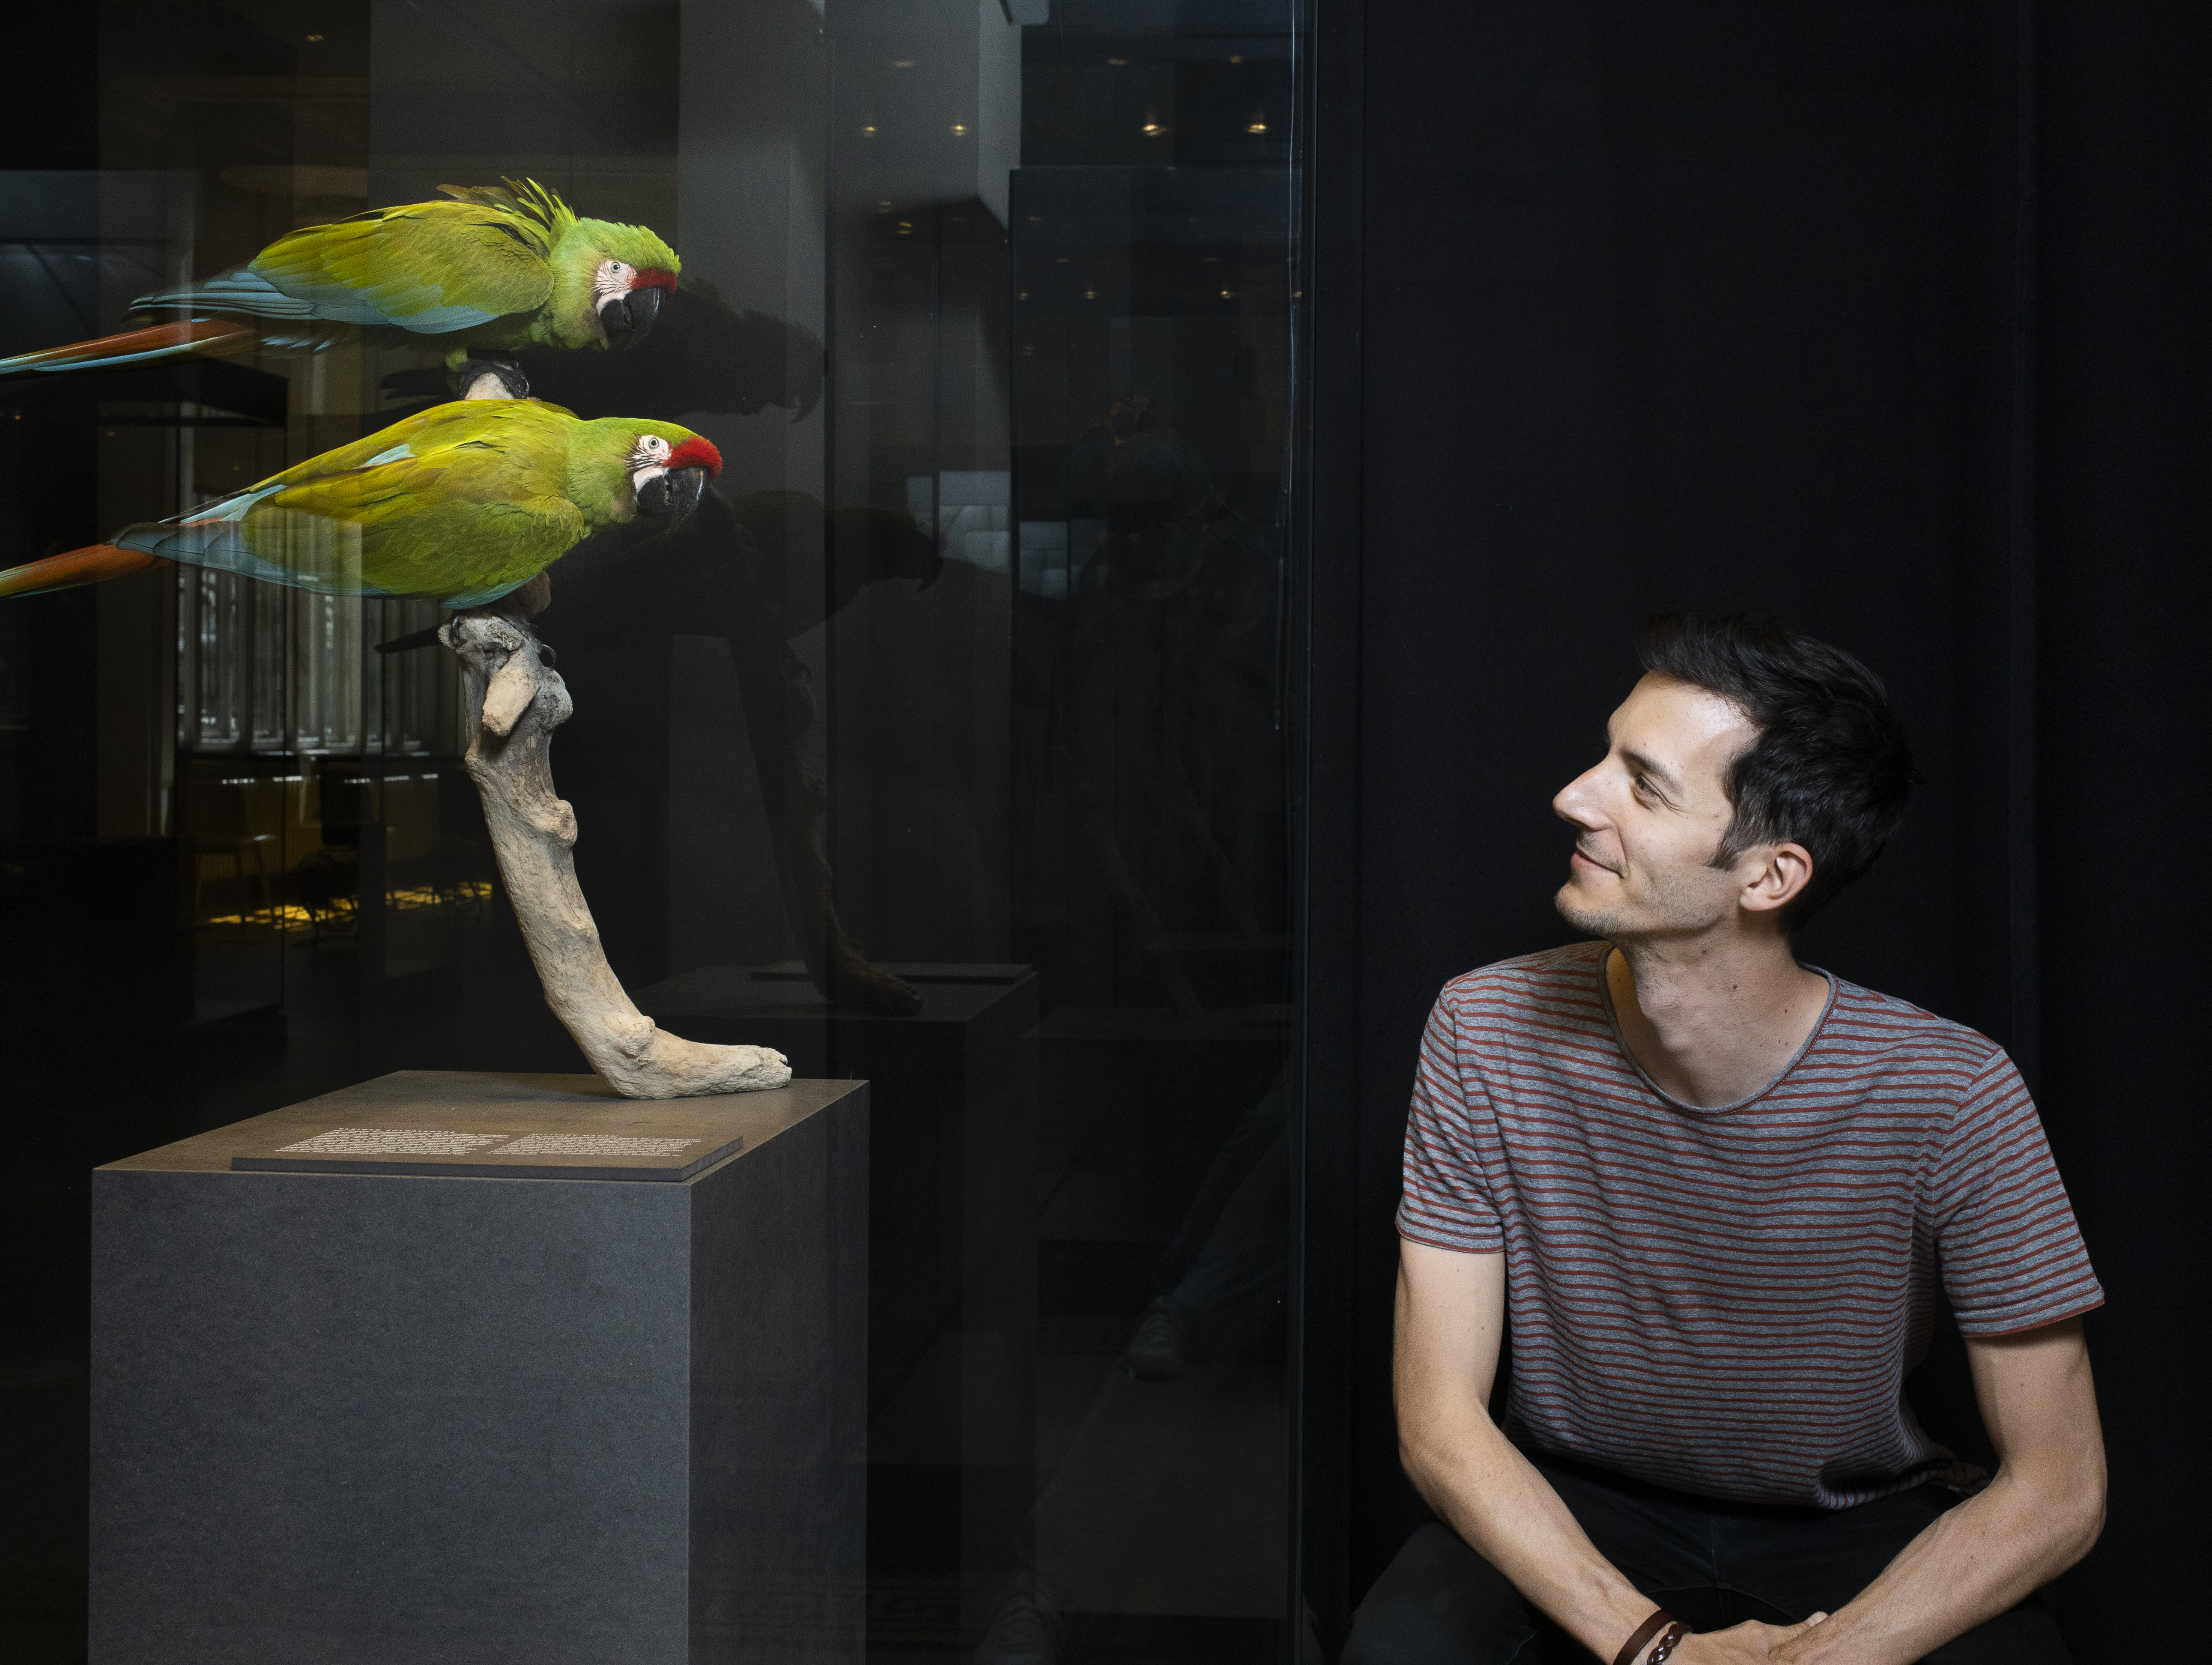 Bruno Delepelaire (on the right) next to two green parrots (on the left).